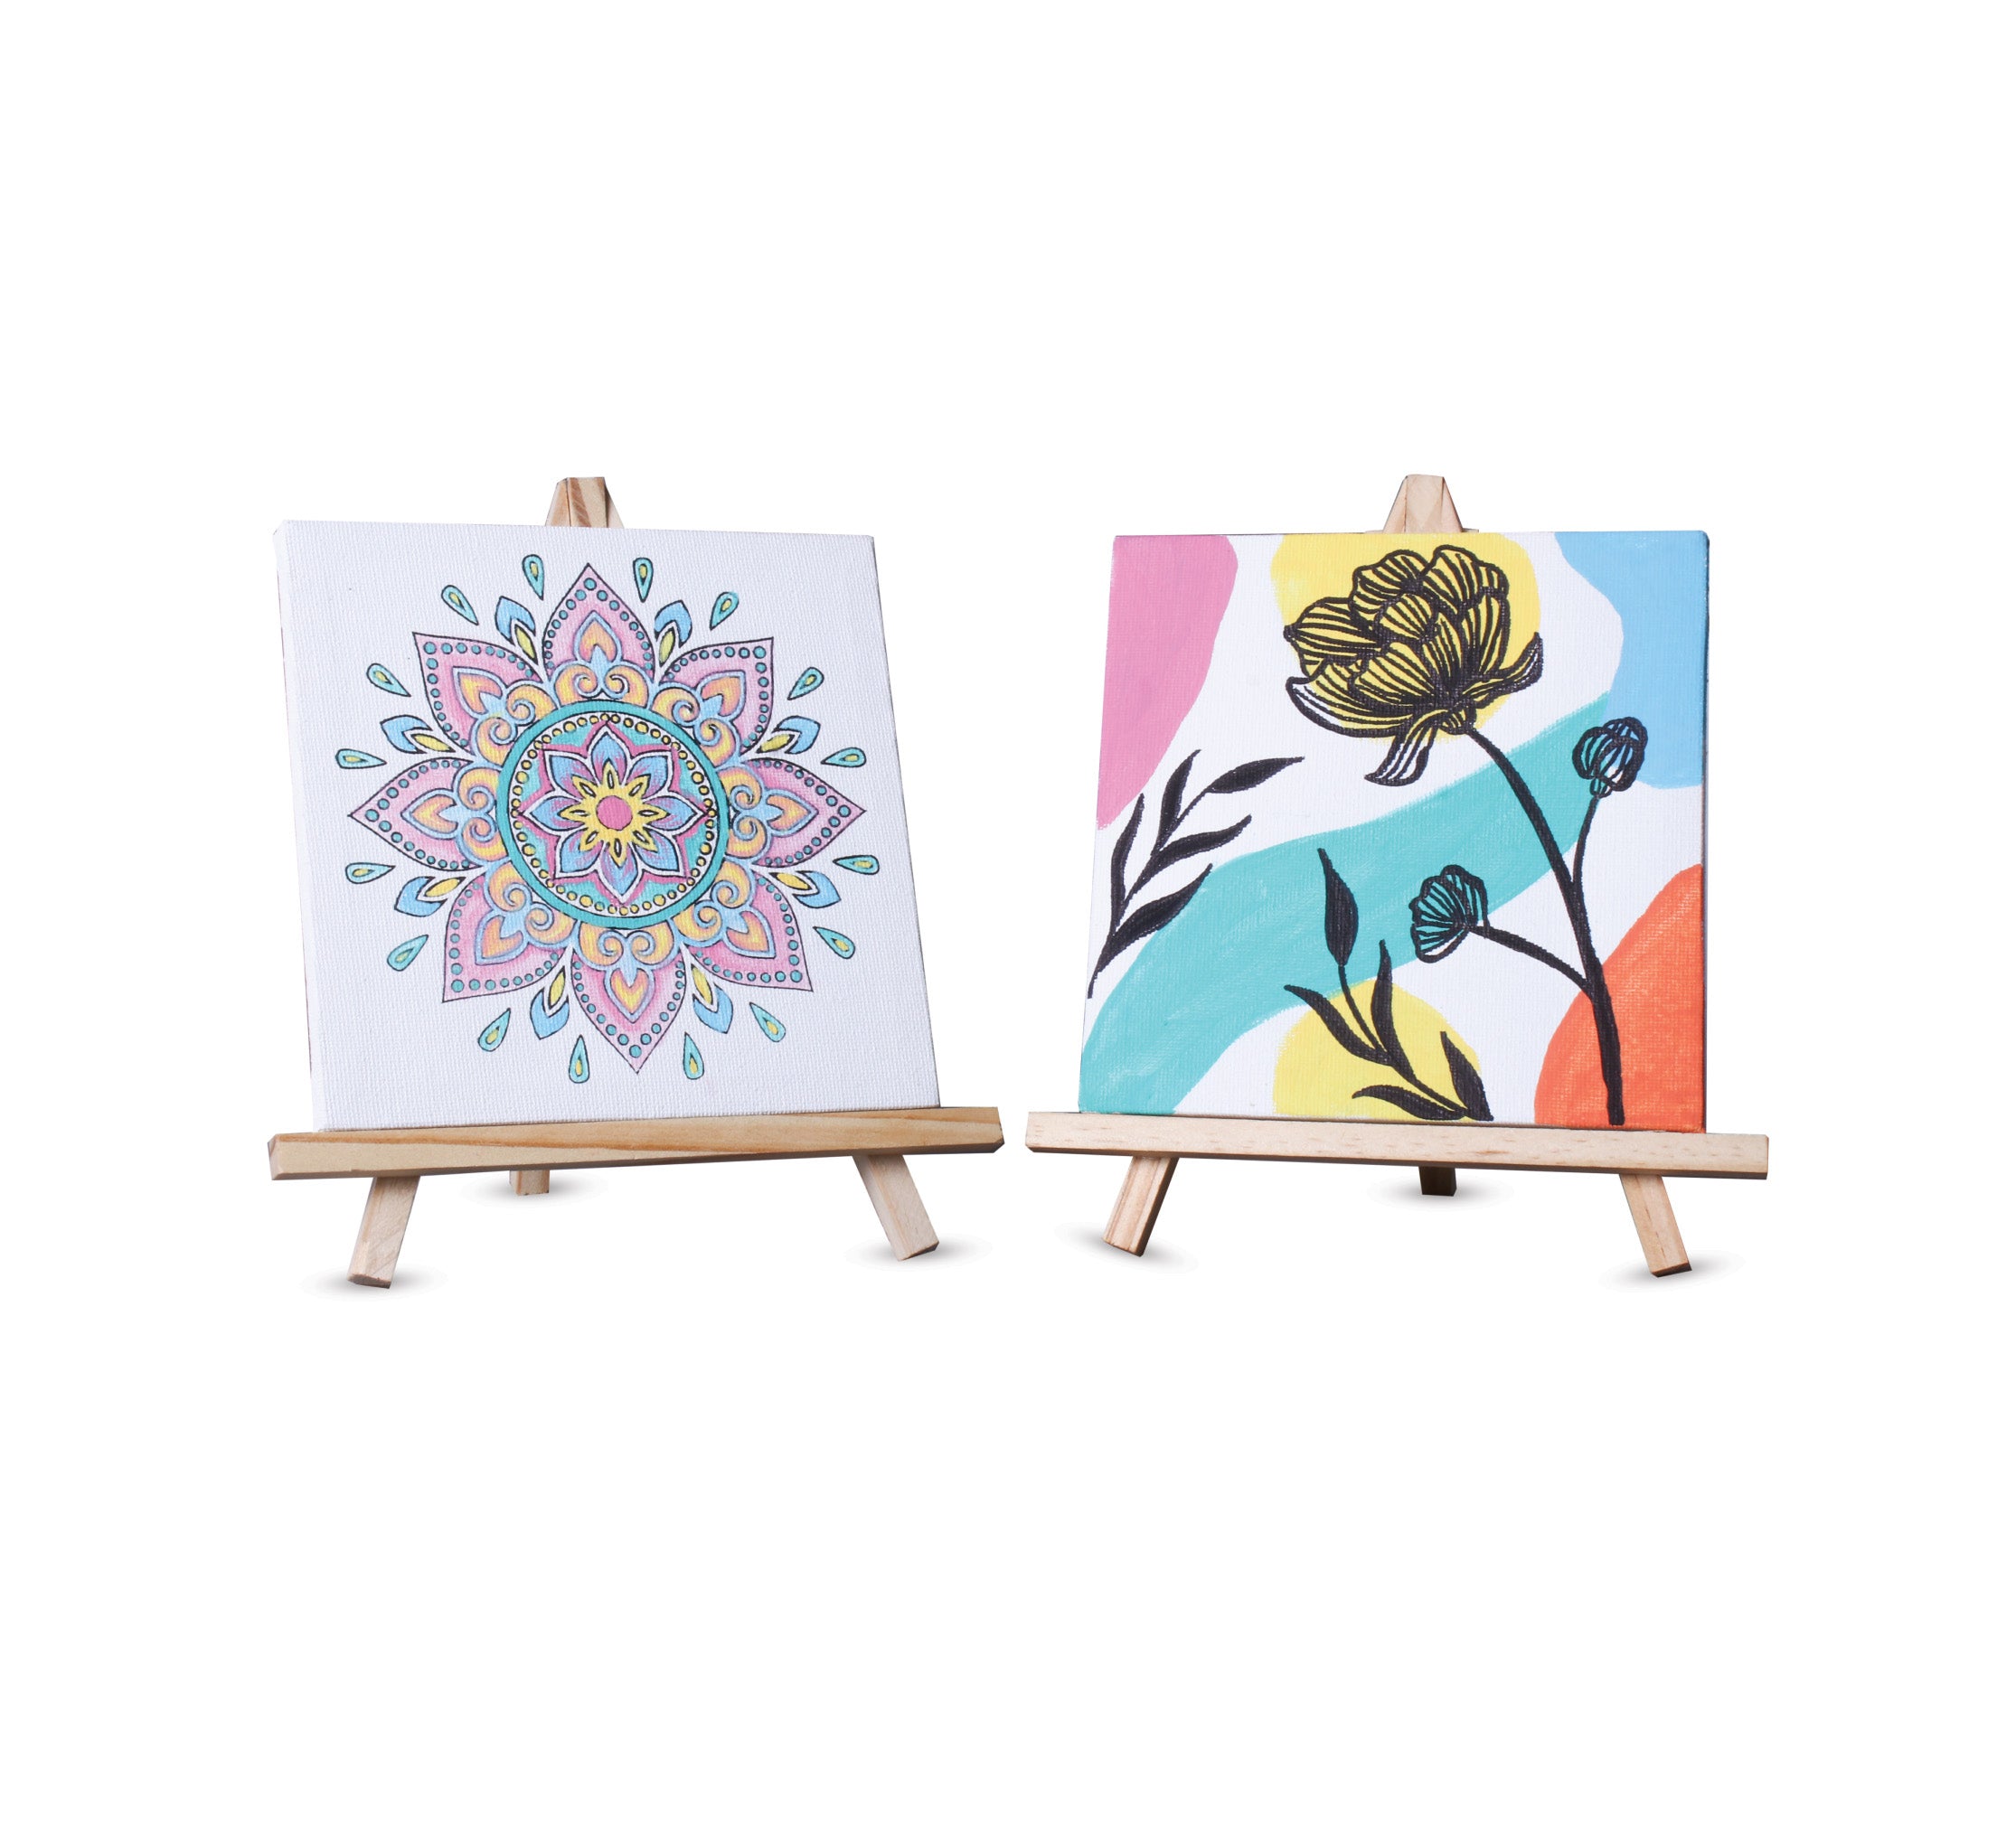 Mandala Blossom Art Kit  - Gift Of Creativity (1 Preprinted Canvas with Easel  1 Plain Canvas with Easel)